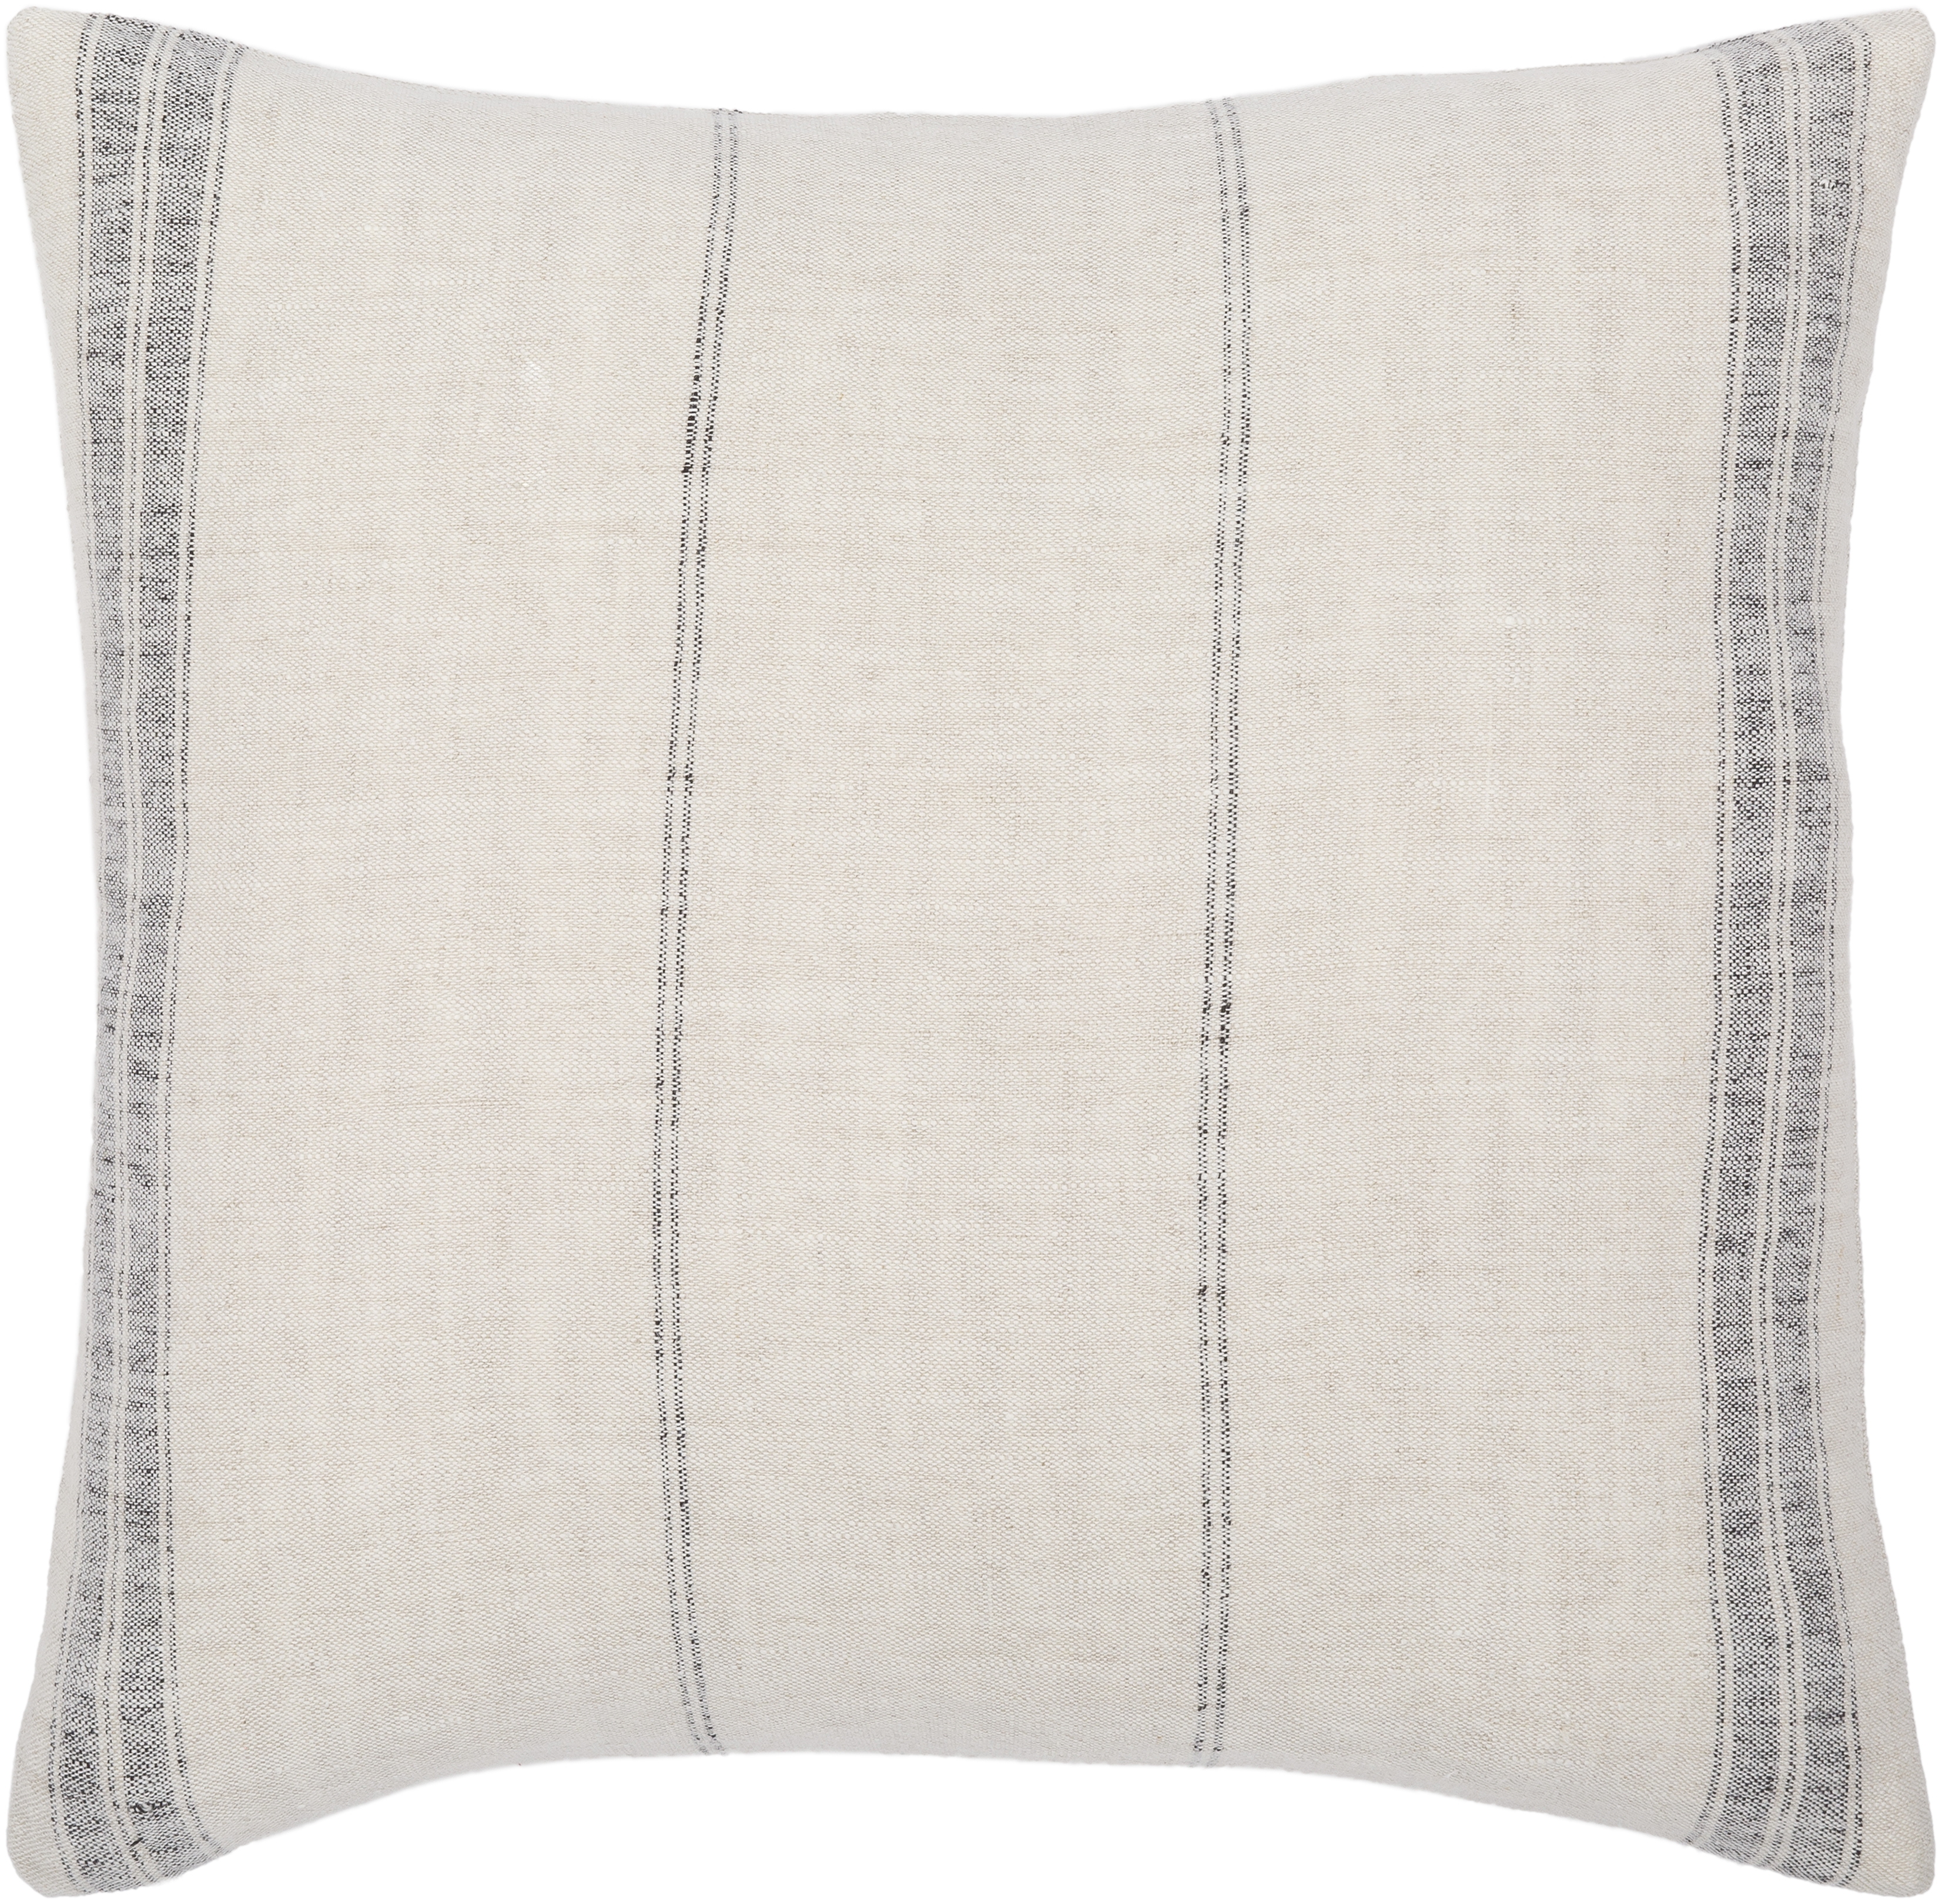 Linen Stripe Vintage Throw Pillow, 18" x 18", with poly insert - Image 0